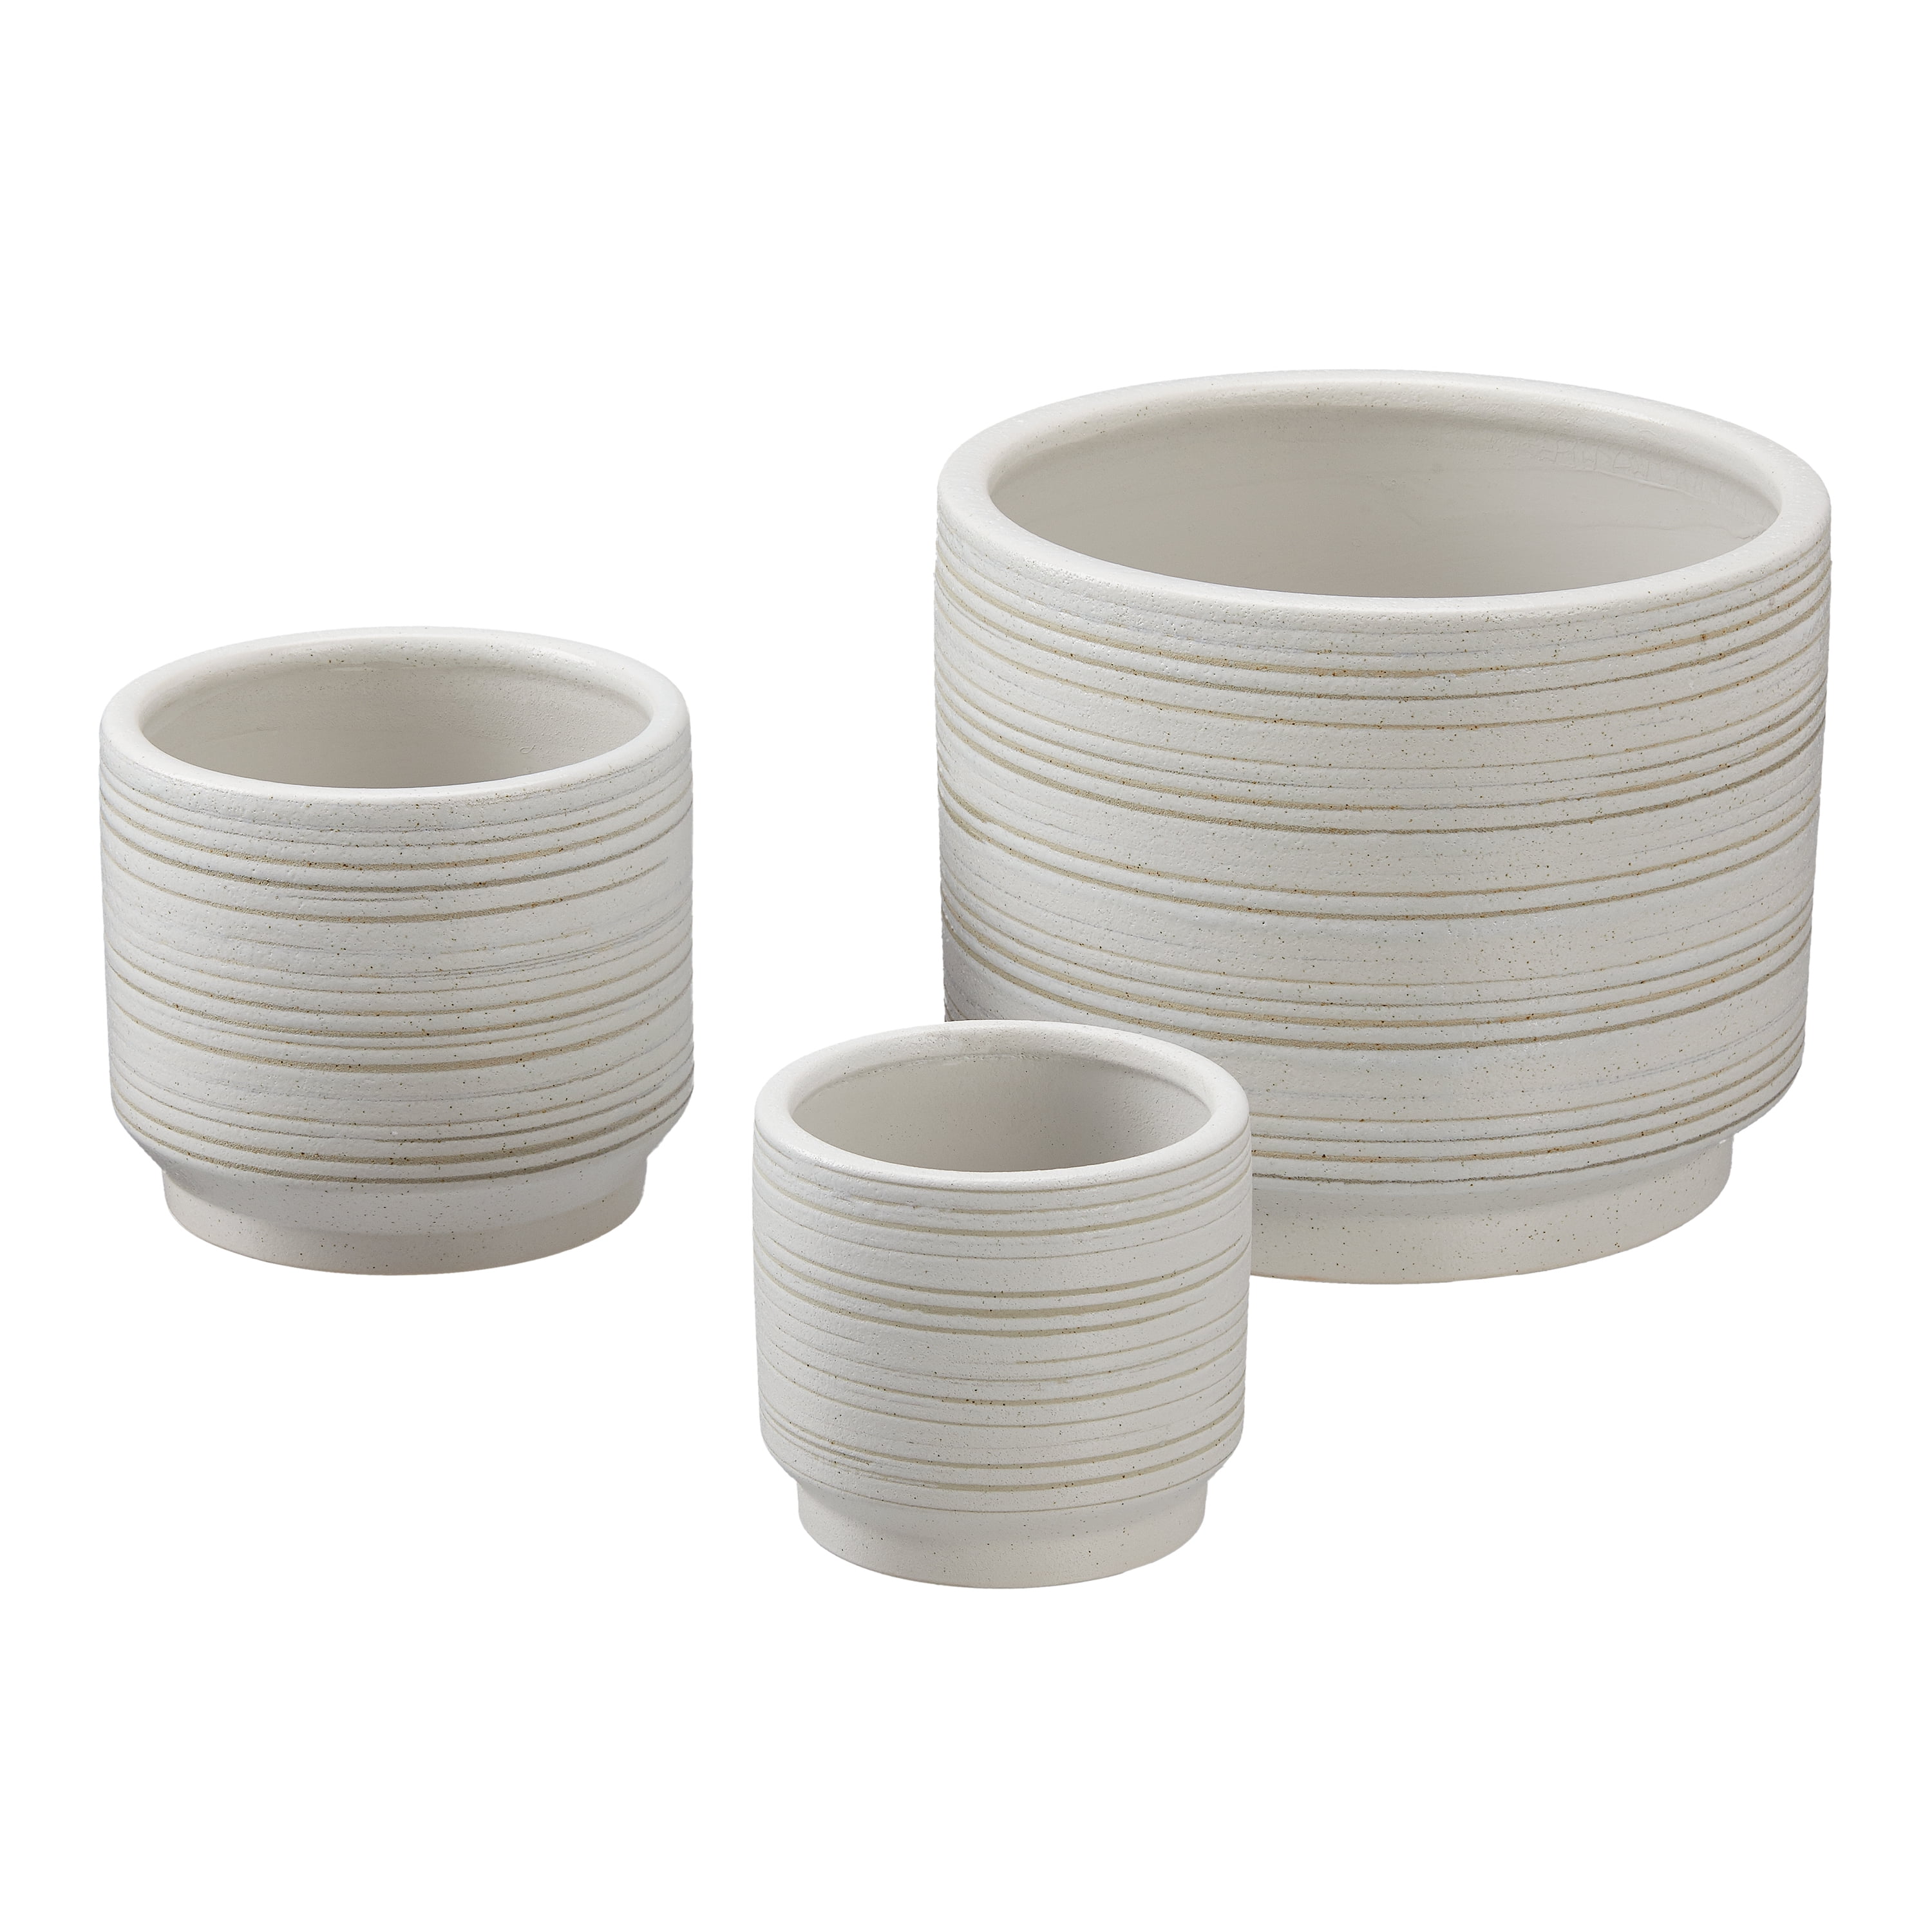 Matt White Set 3 Ceramic Plant Pots with Bamboo Coasters Indoor Planters  White Pot Ser Ceramic Flower Pots Containers Outdoor Large, Medium, Small